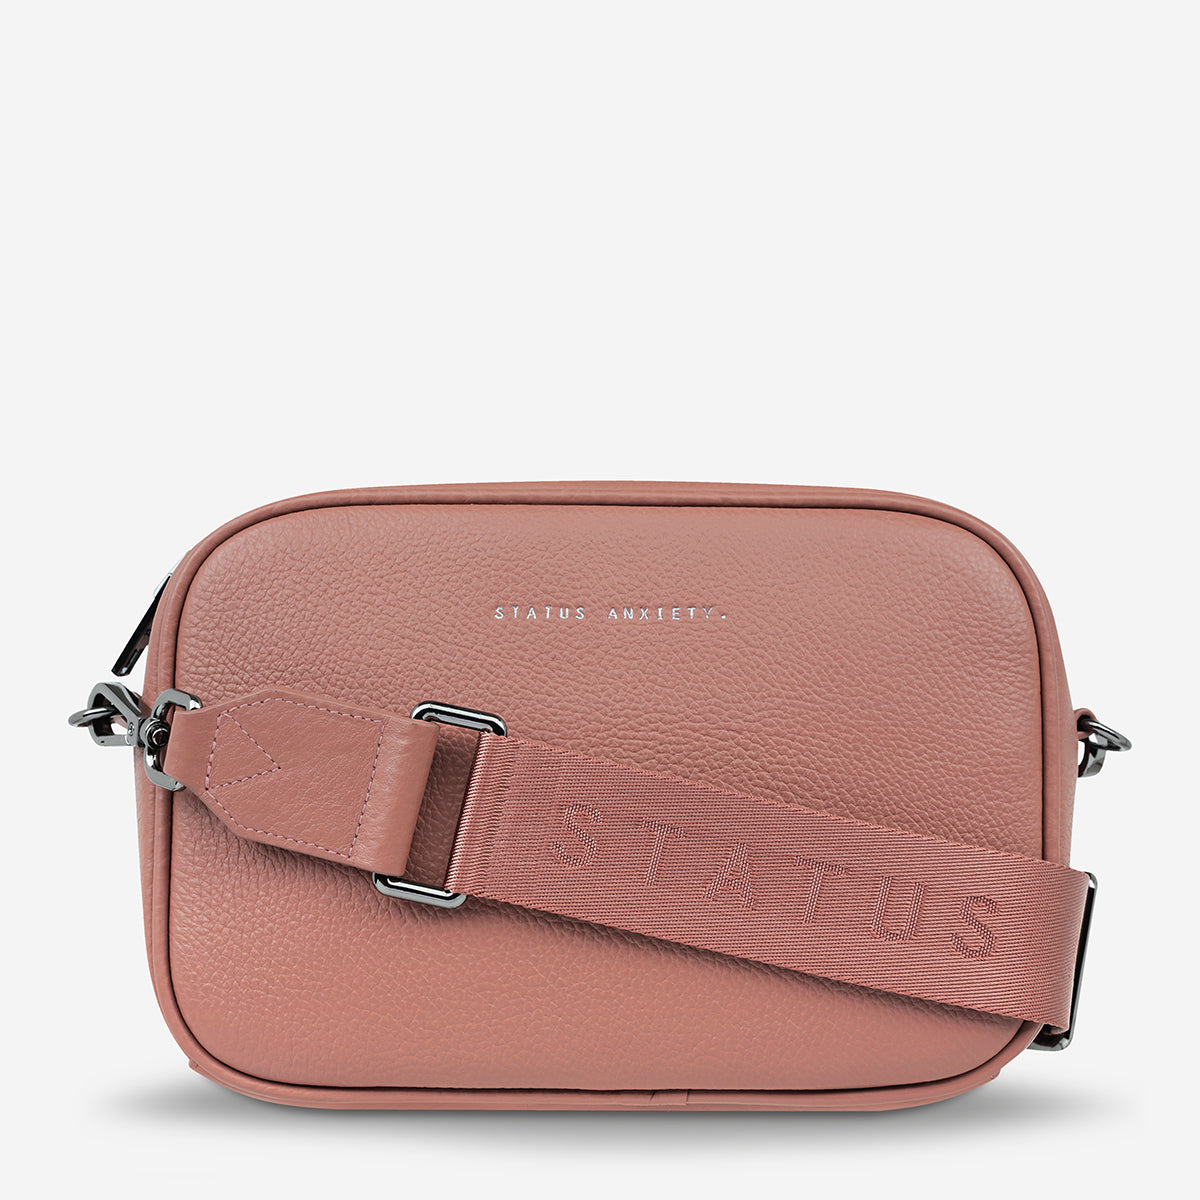 status-anxiety-bag-plunder-webbed-strap-dusty-rose-front-wrapped.jpg